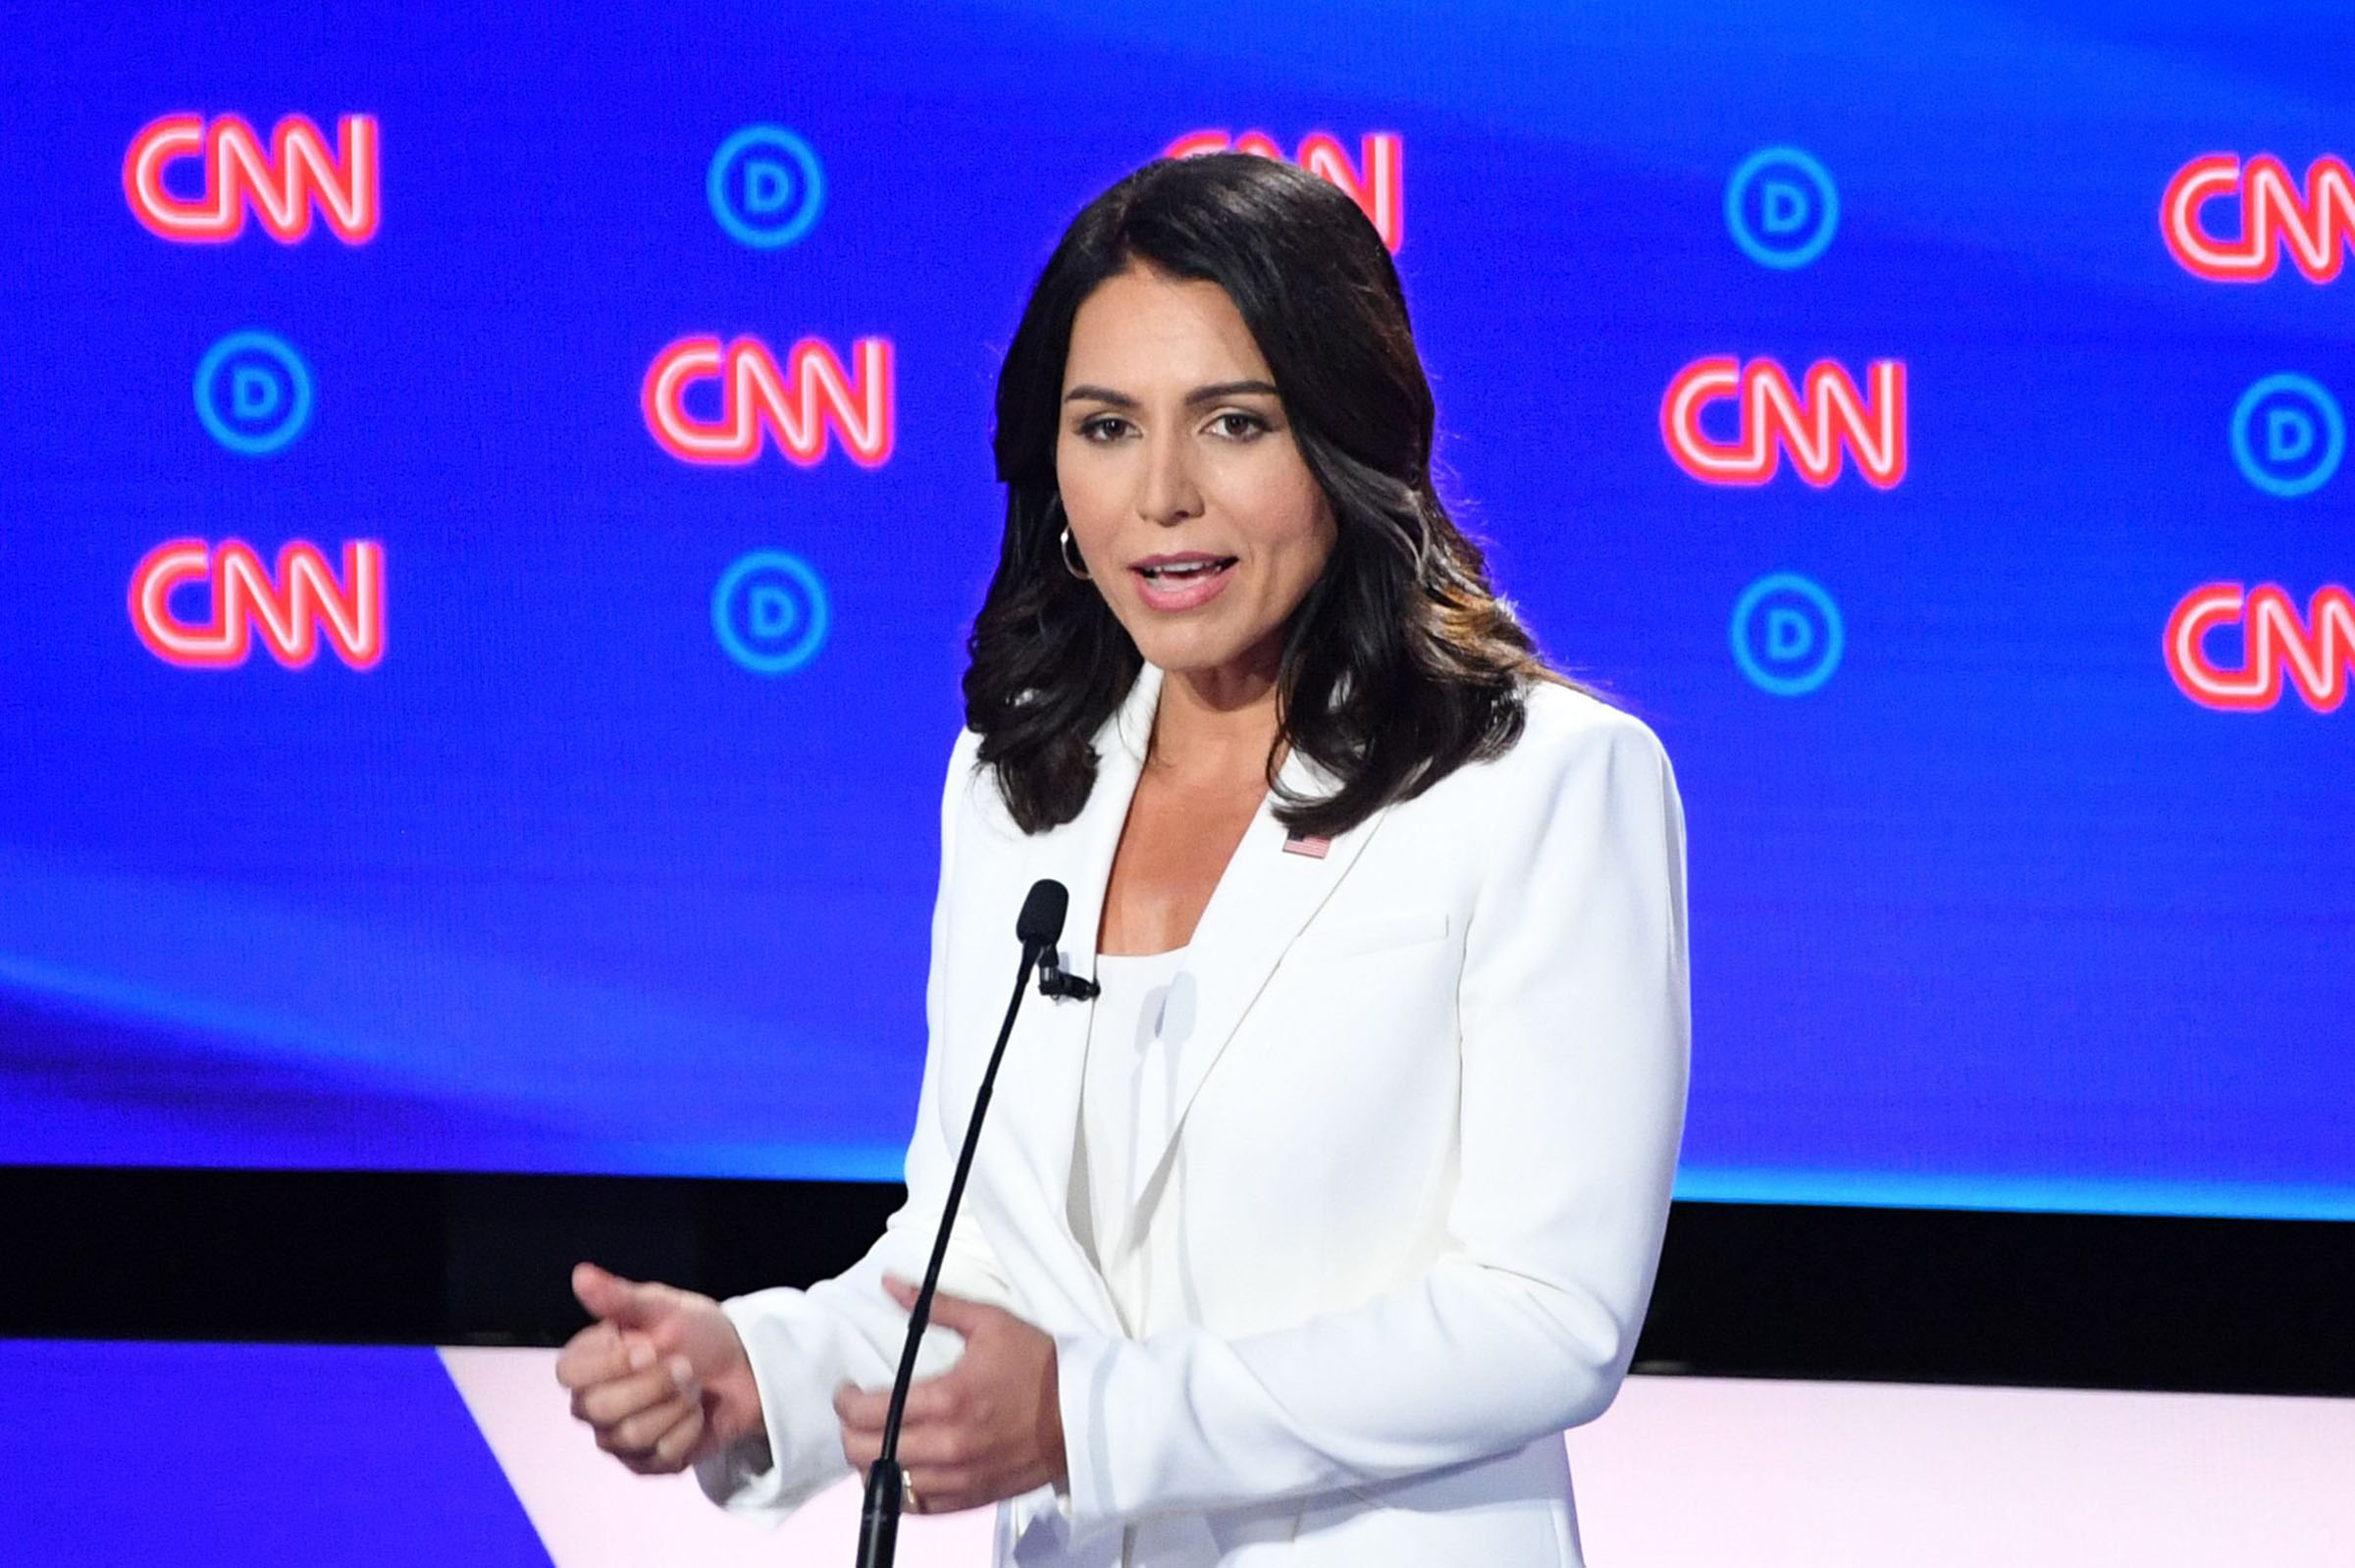 Democratic presidential hopeful US Representative for Hawaii's 2nd congressional district Tulsi Gabbard speaks during the second round of the second Democratic primary debate of the 2020 presidential campaign season hosted by CNN at the Fox Theatre in Detroit, Michigan on July 31, 2019. (Jim Watson—AFP/Getty Images)